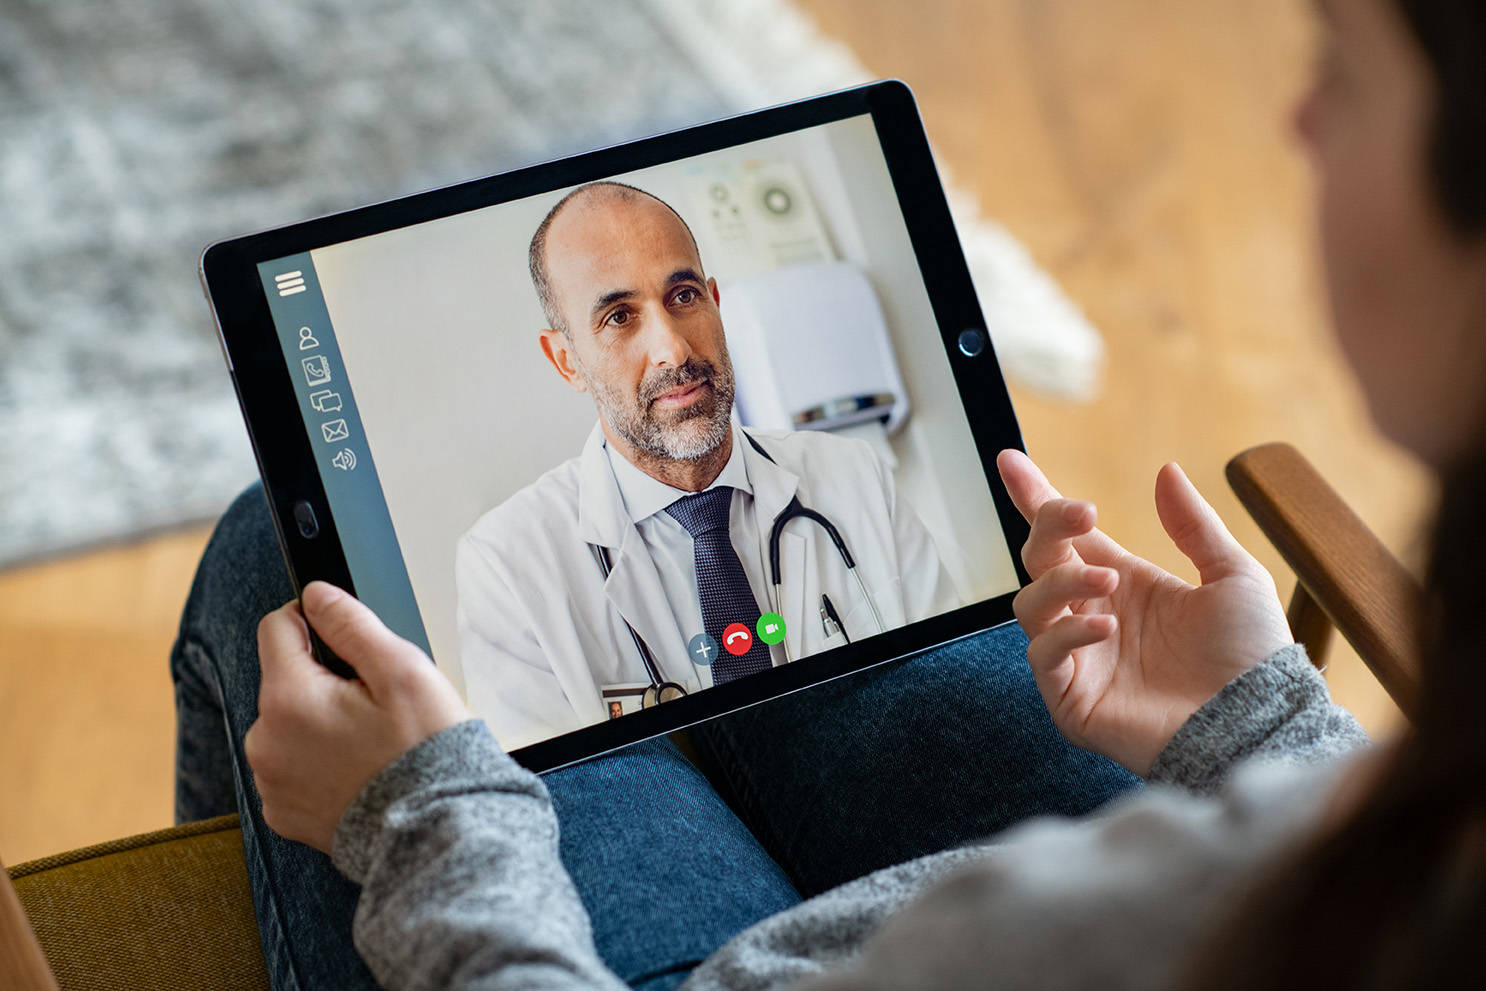 Male doctor speaking to patient on a tablet